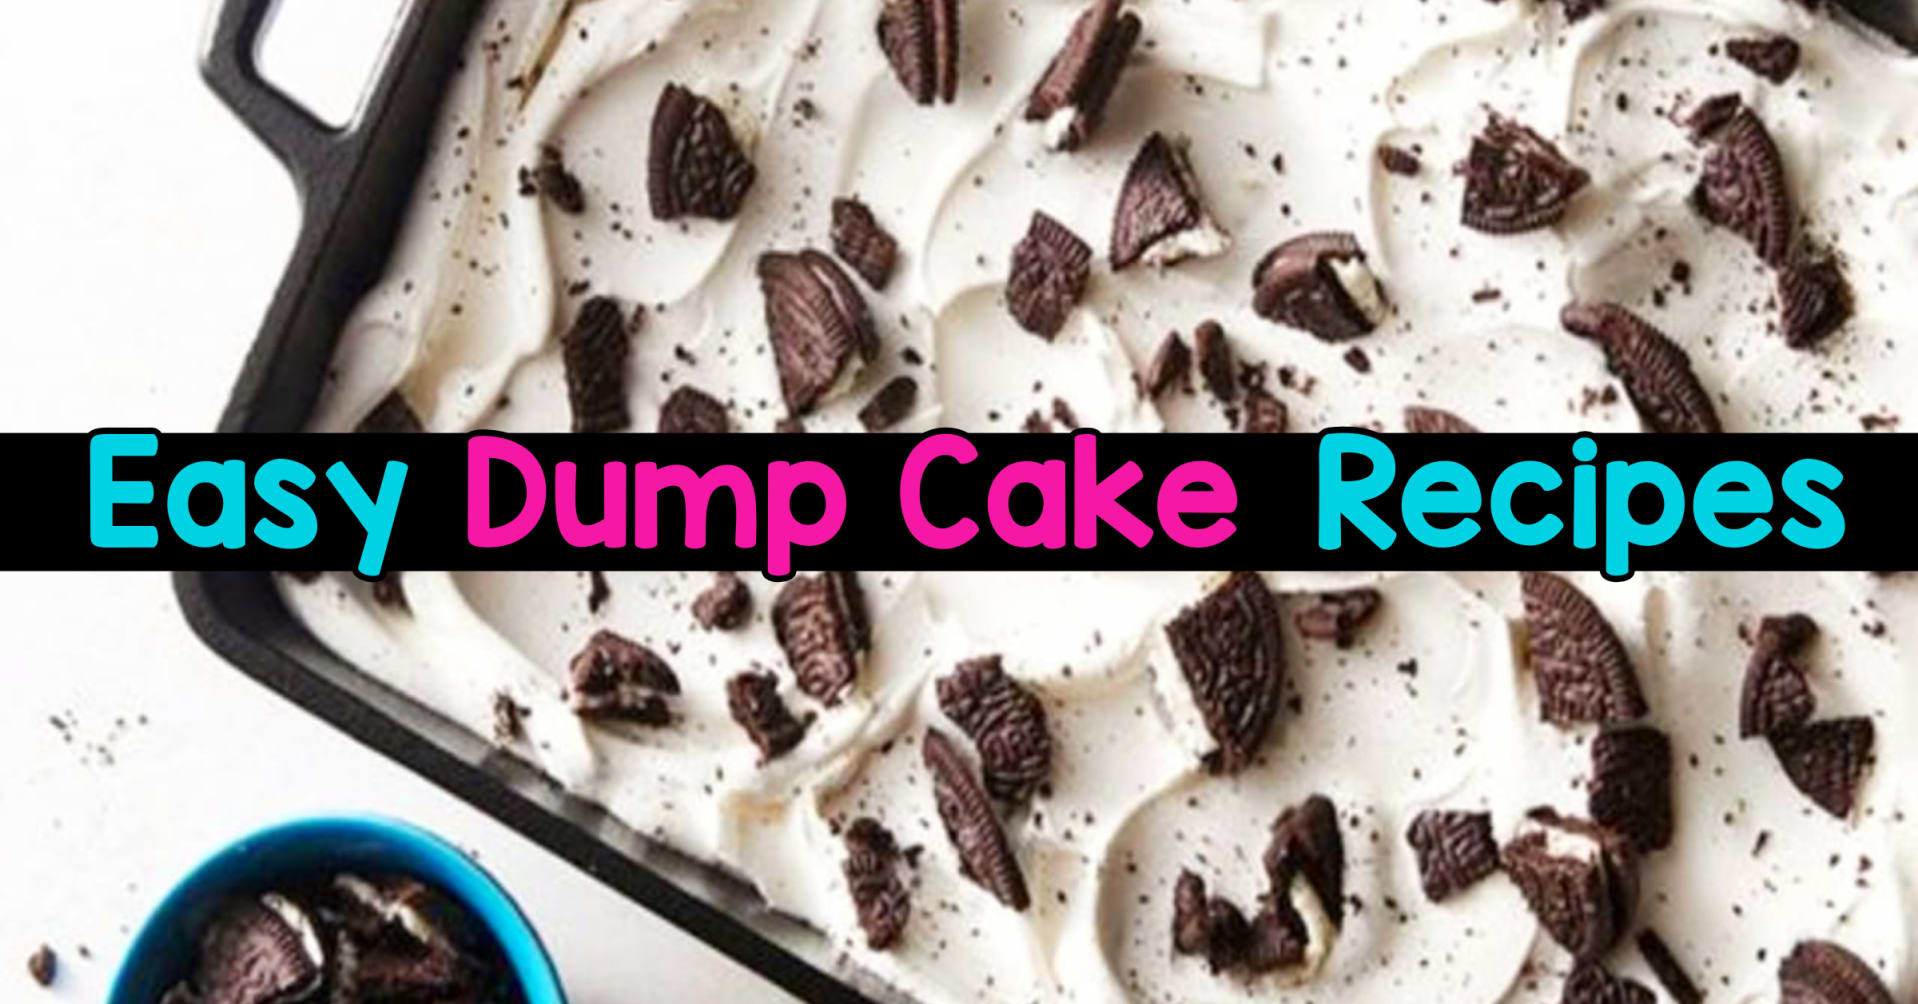 Super simple desserts for a crowd - easy dump cake recipes